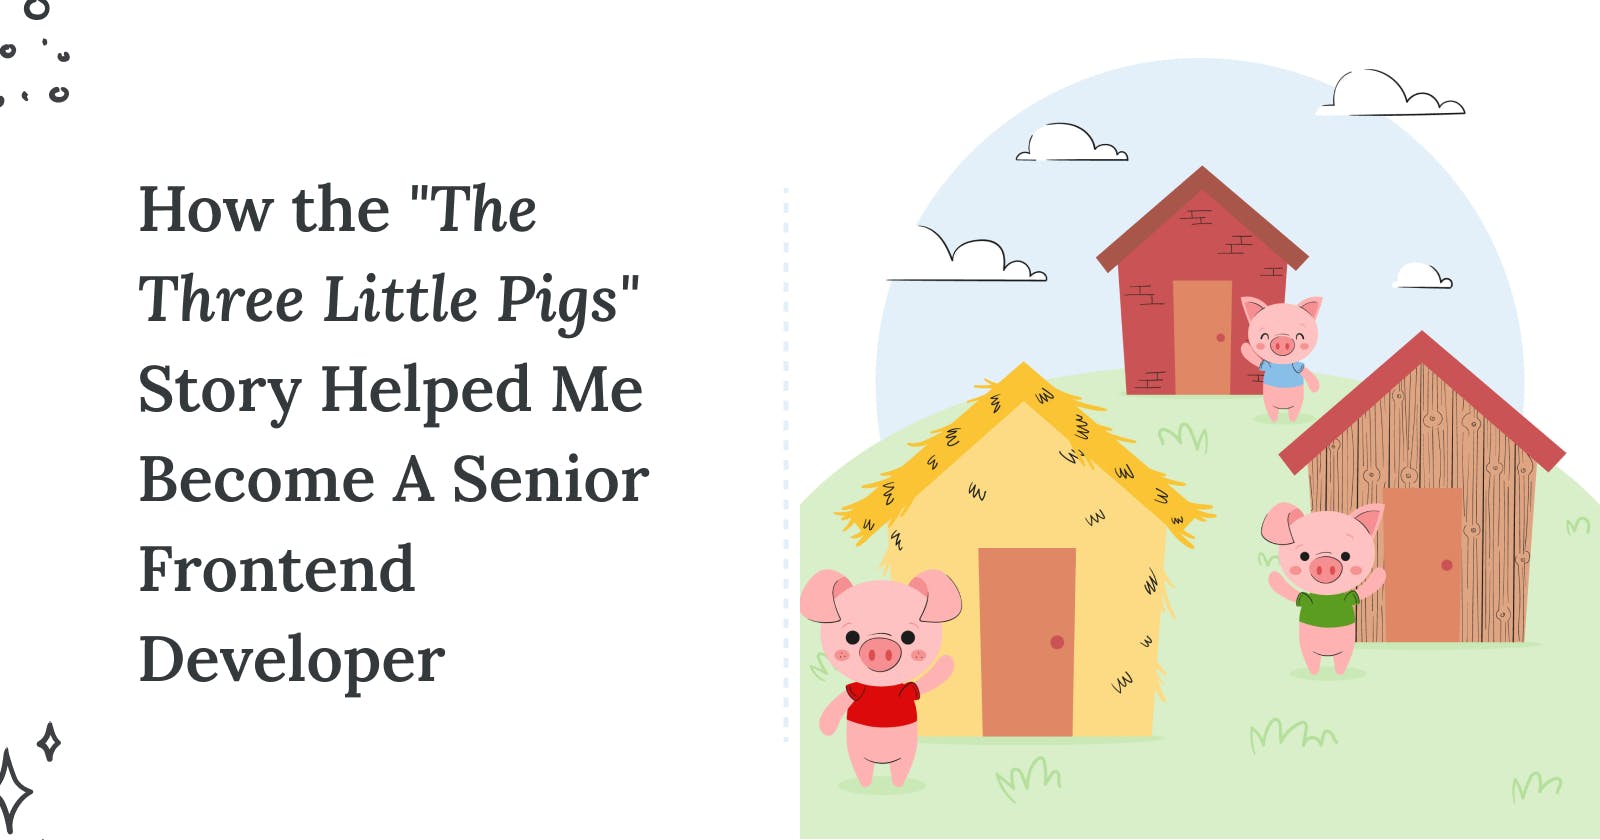 How the "The Three Little Pigs" Story Helped Me Become A Better Frontend Developer